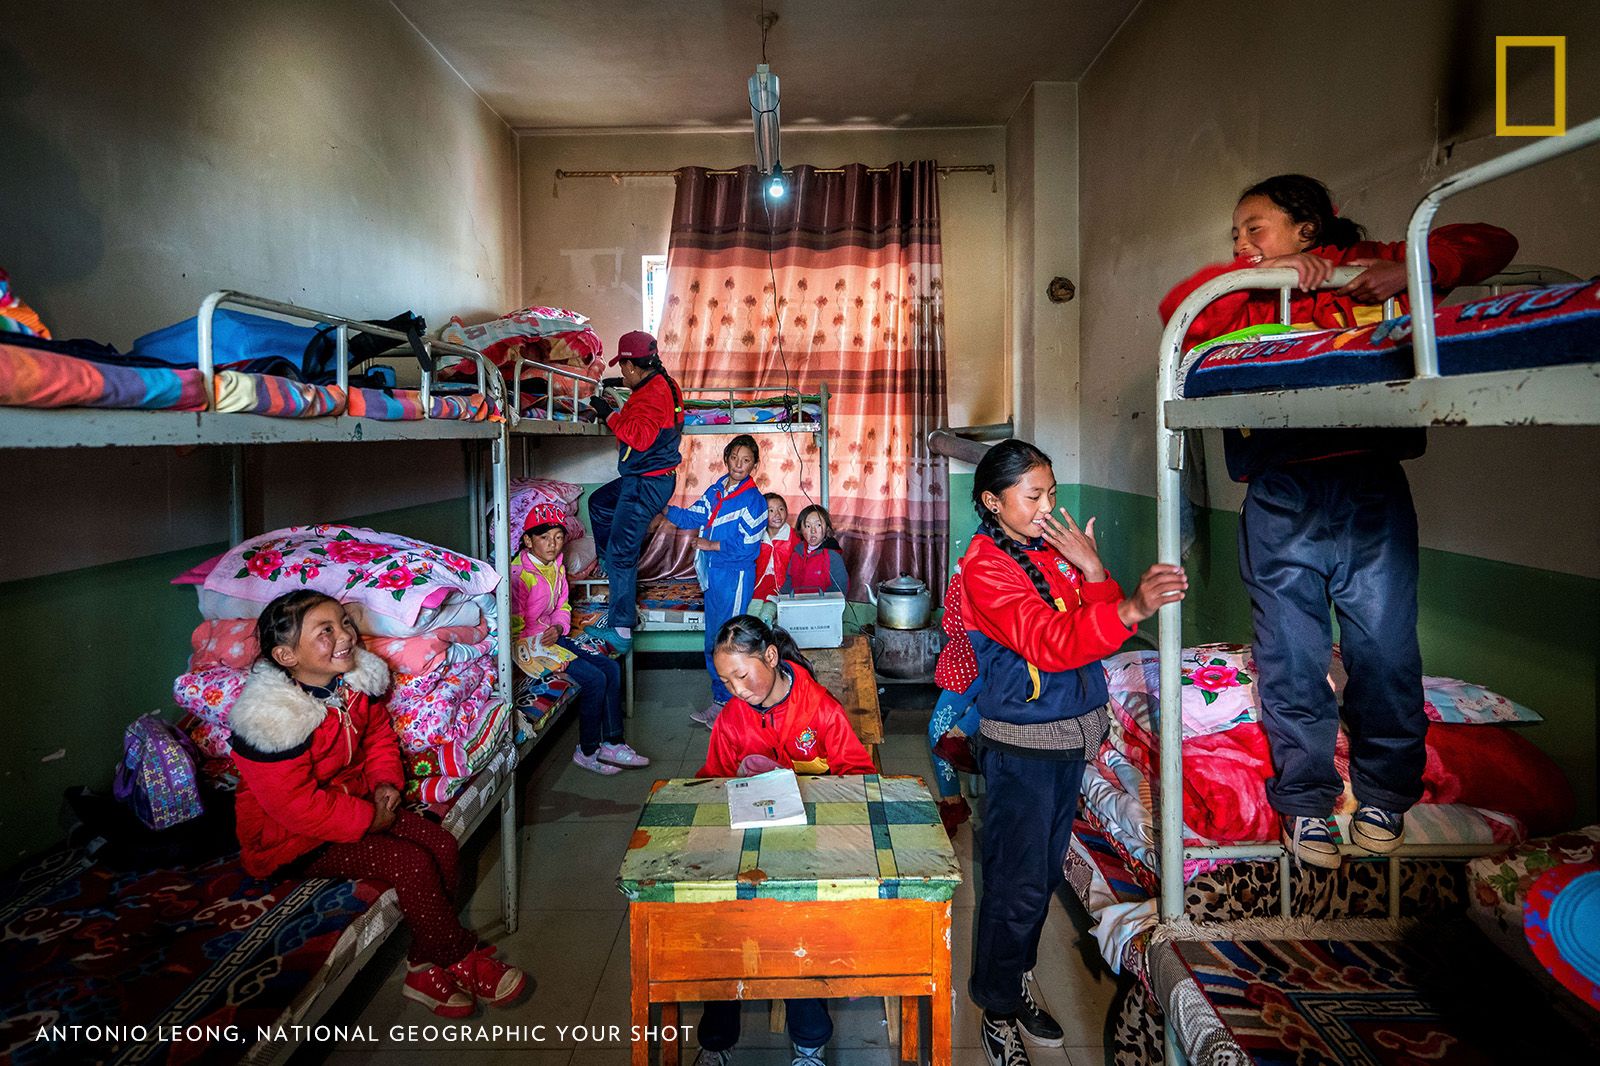 “Far away from the nearest modernized city in Qinghai, I traveled with Oxfam for about 10 hours to visit the Tibetan students staying in this boarding school. Instead of rushing back to their room after lunch to play with their smartphone or tablet, these kids are finding a suitable place in this small room packed with eight students so they can take out their books and start studying.” Image by Antonio Leon, National Geographic Your Shot. China, 2017.